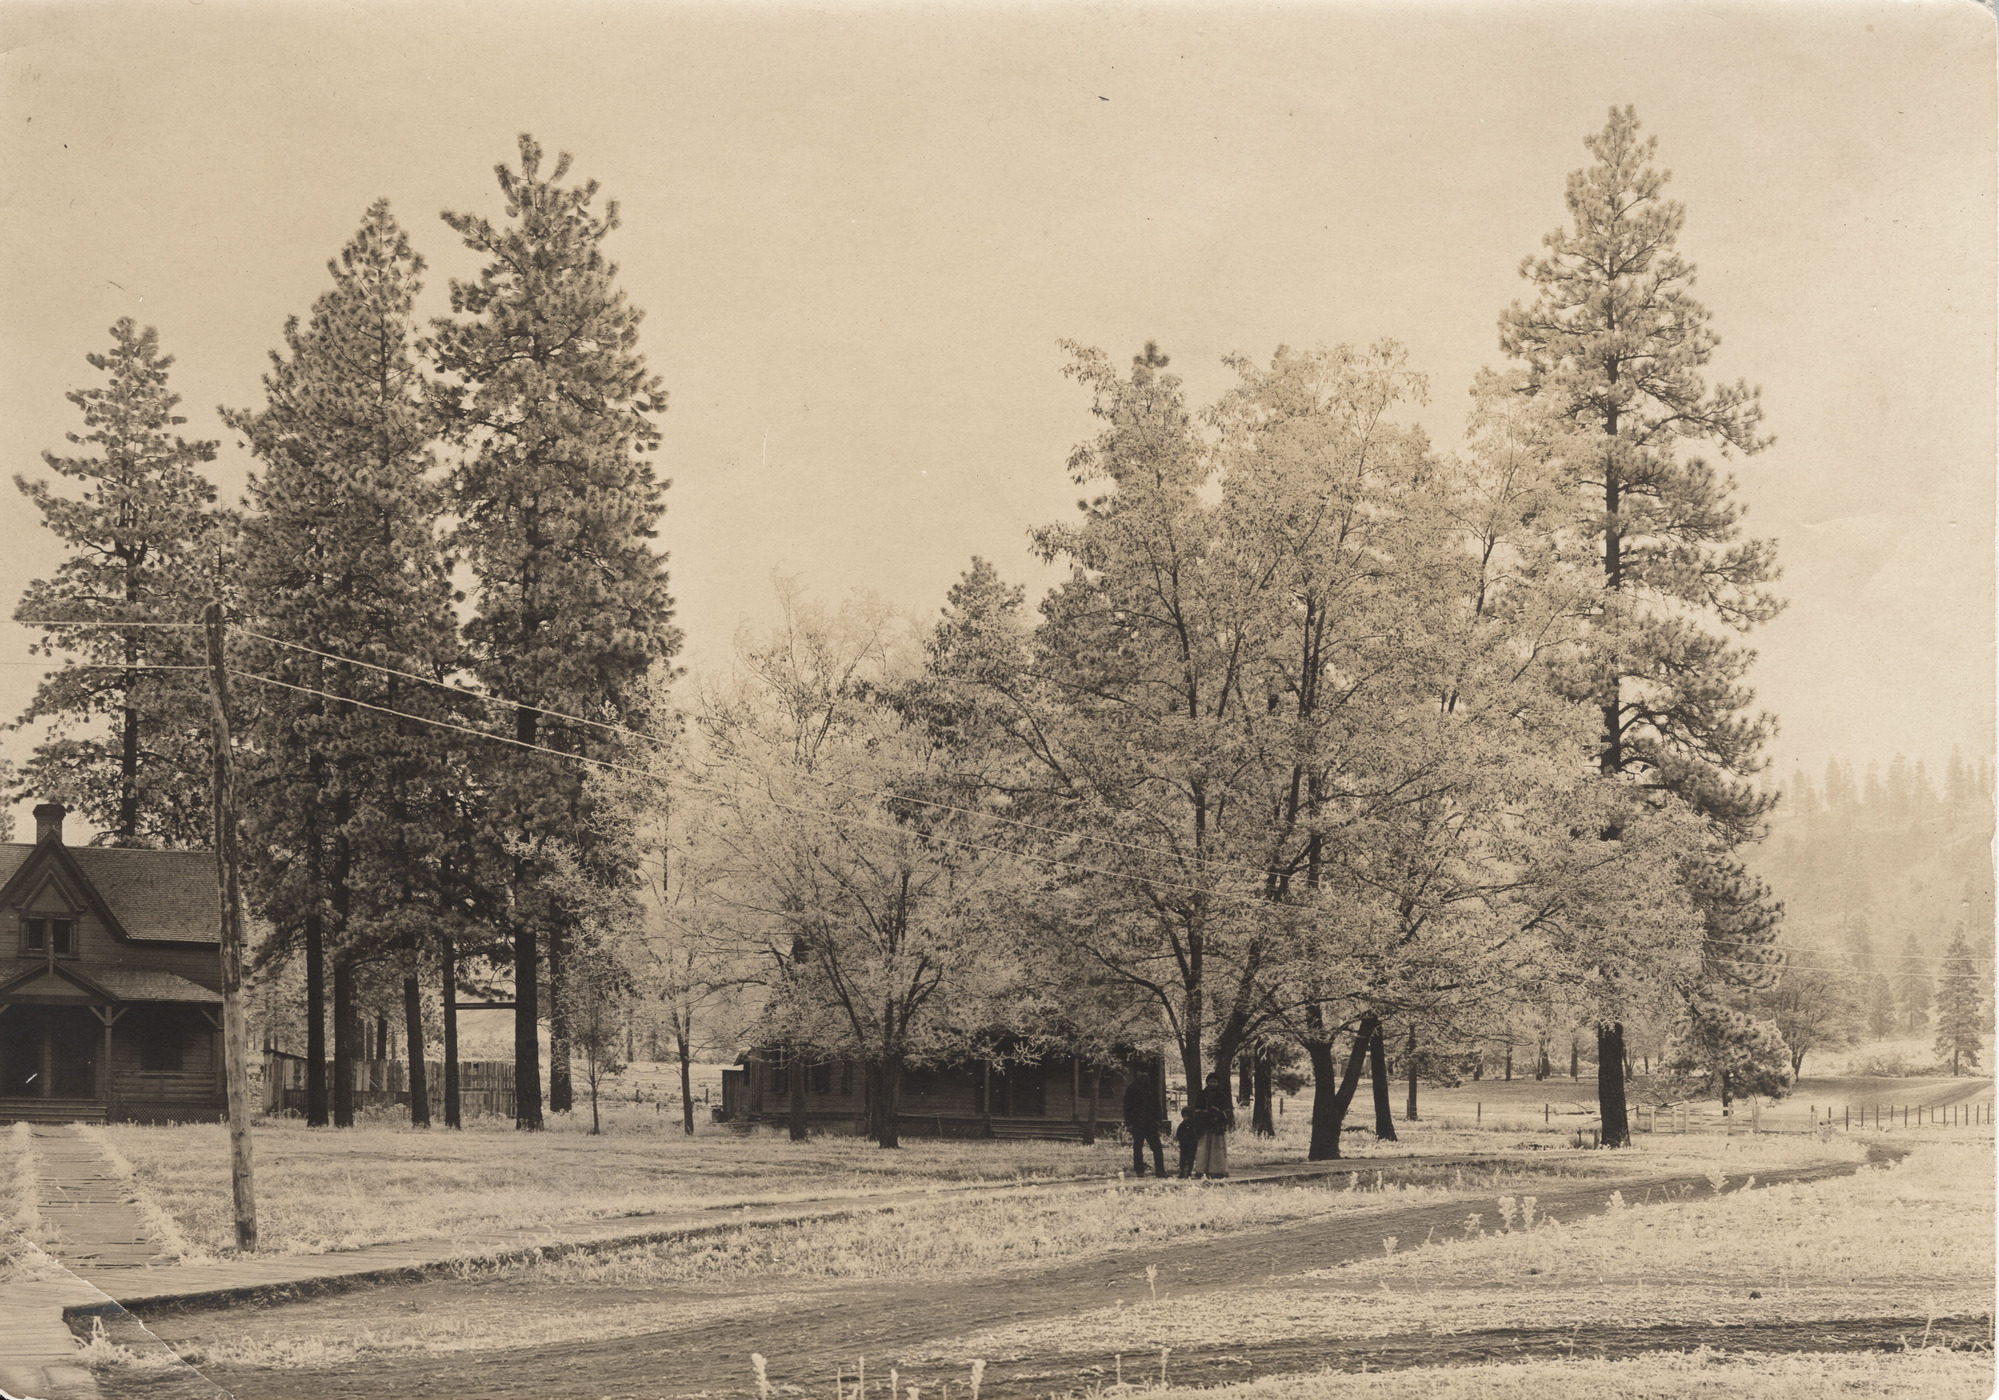 Sepia toned photograph of a family among trees and buildings next to a road